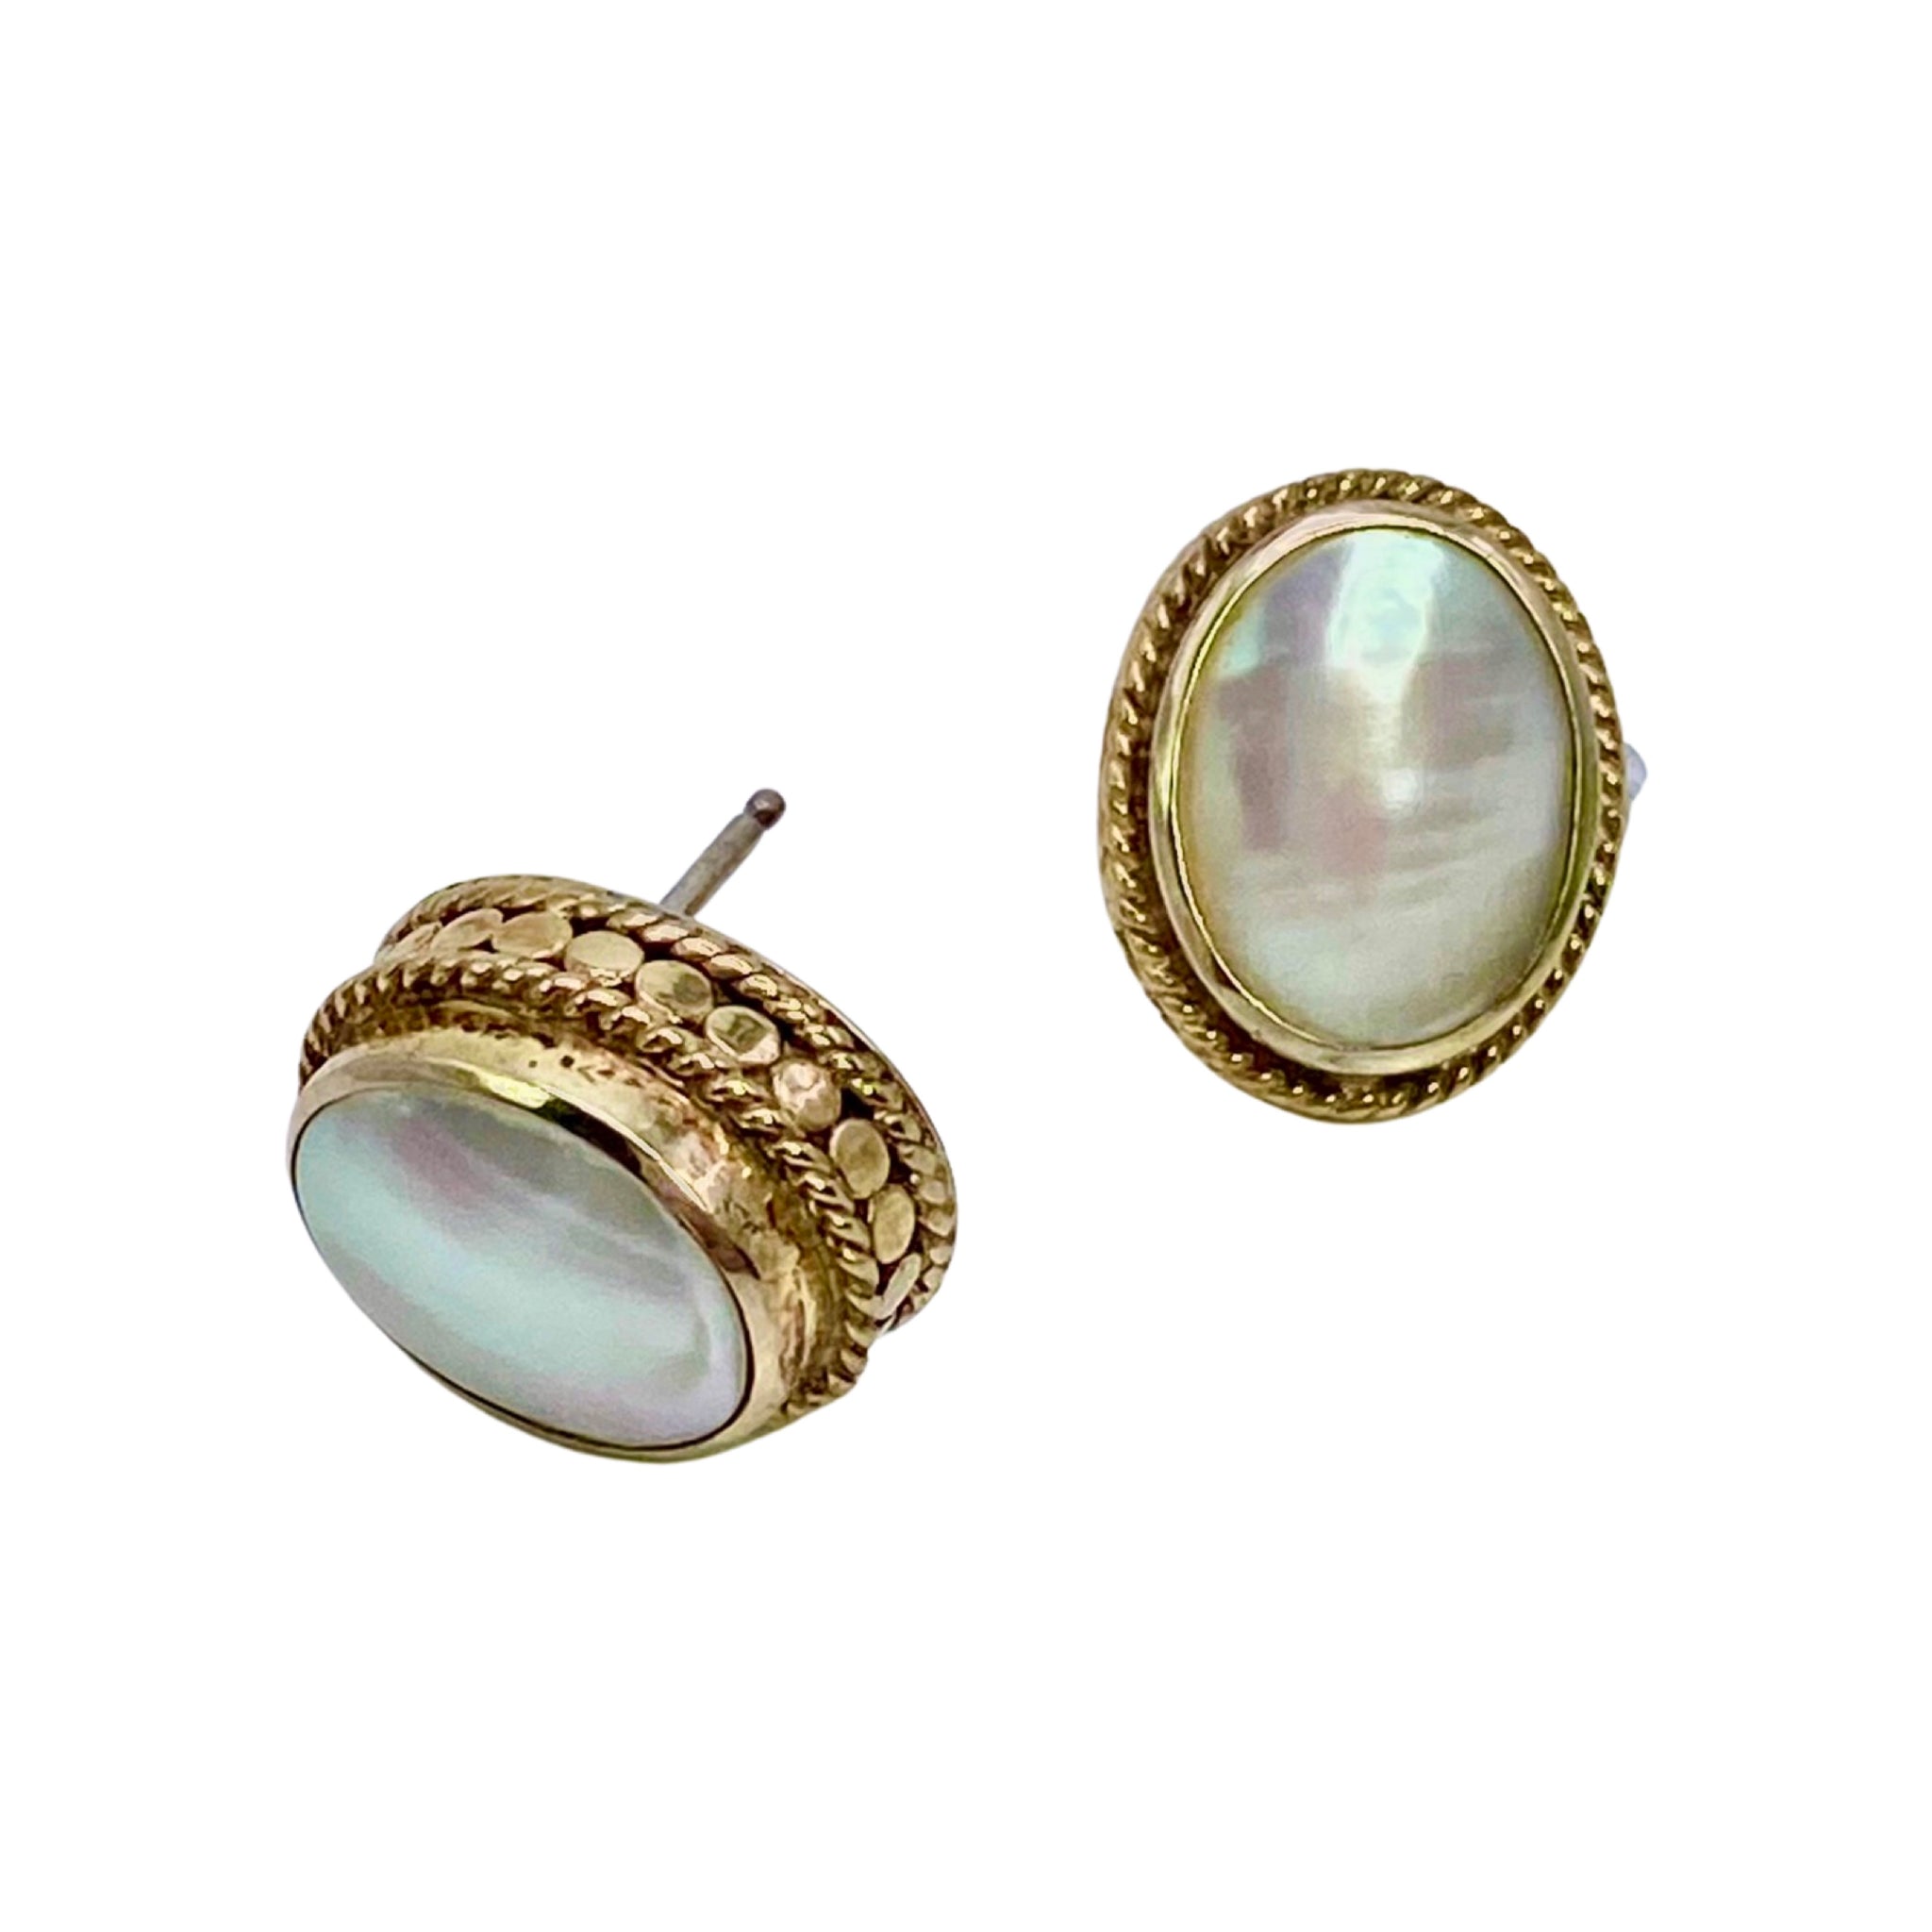 Anna Beck Mother of Pearl Stud Earrings - Available at Shaylula Jewlery & Gifts in Tarrytown, NY